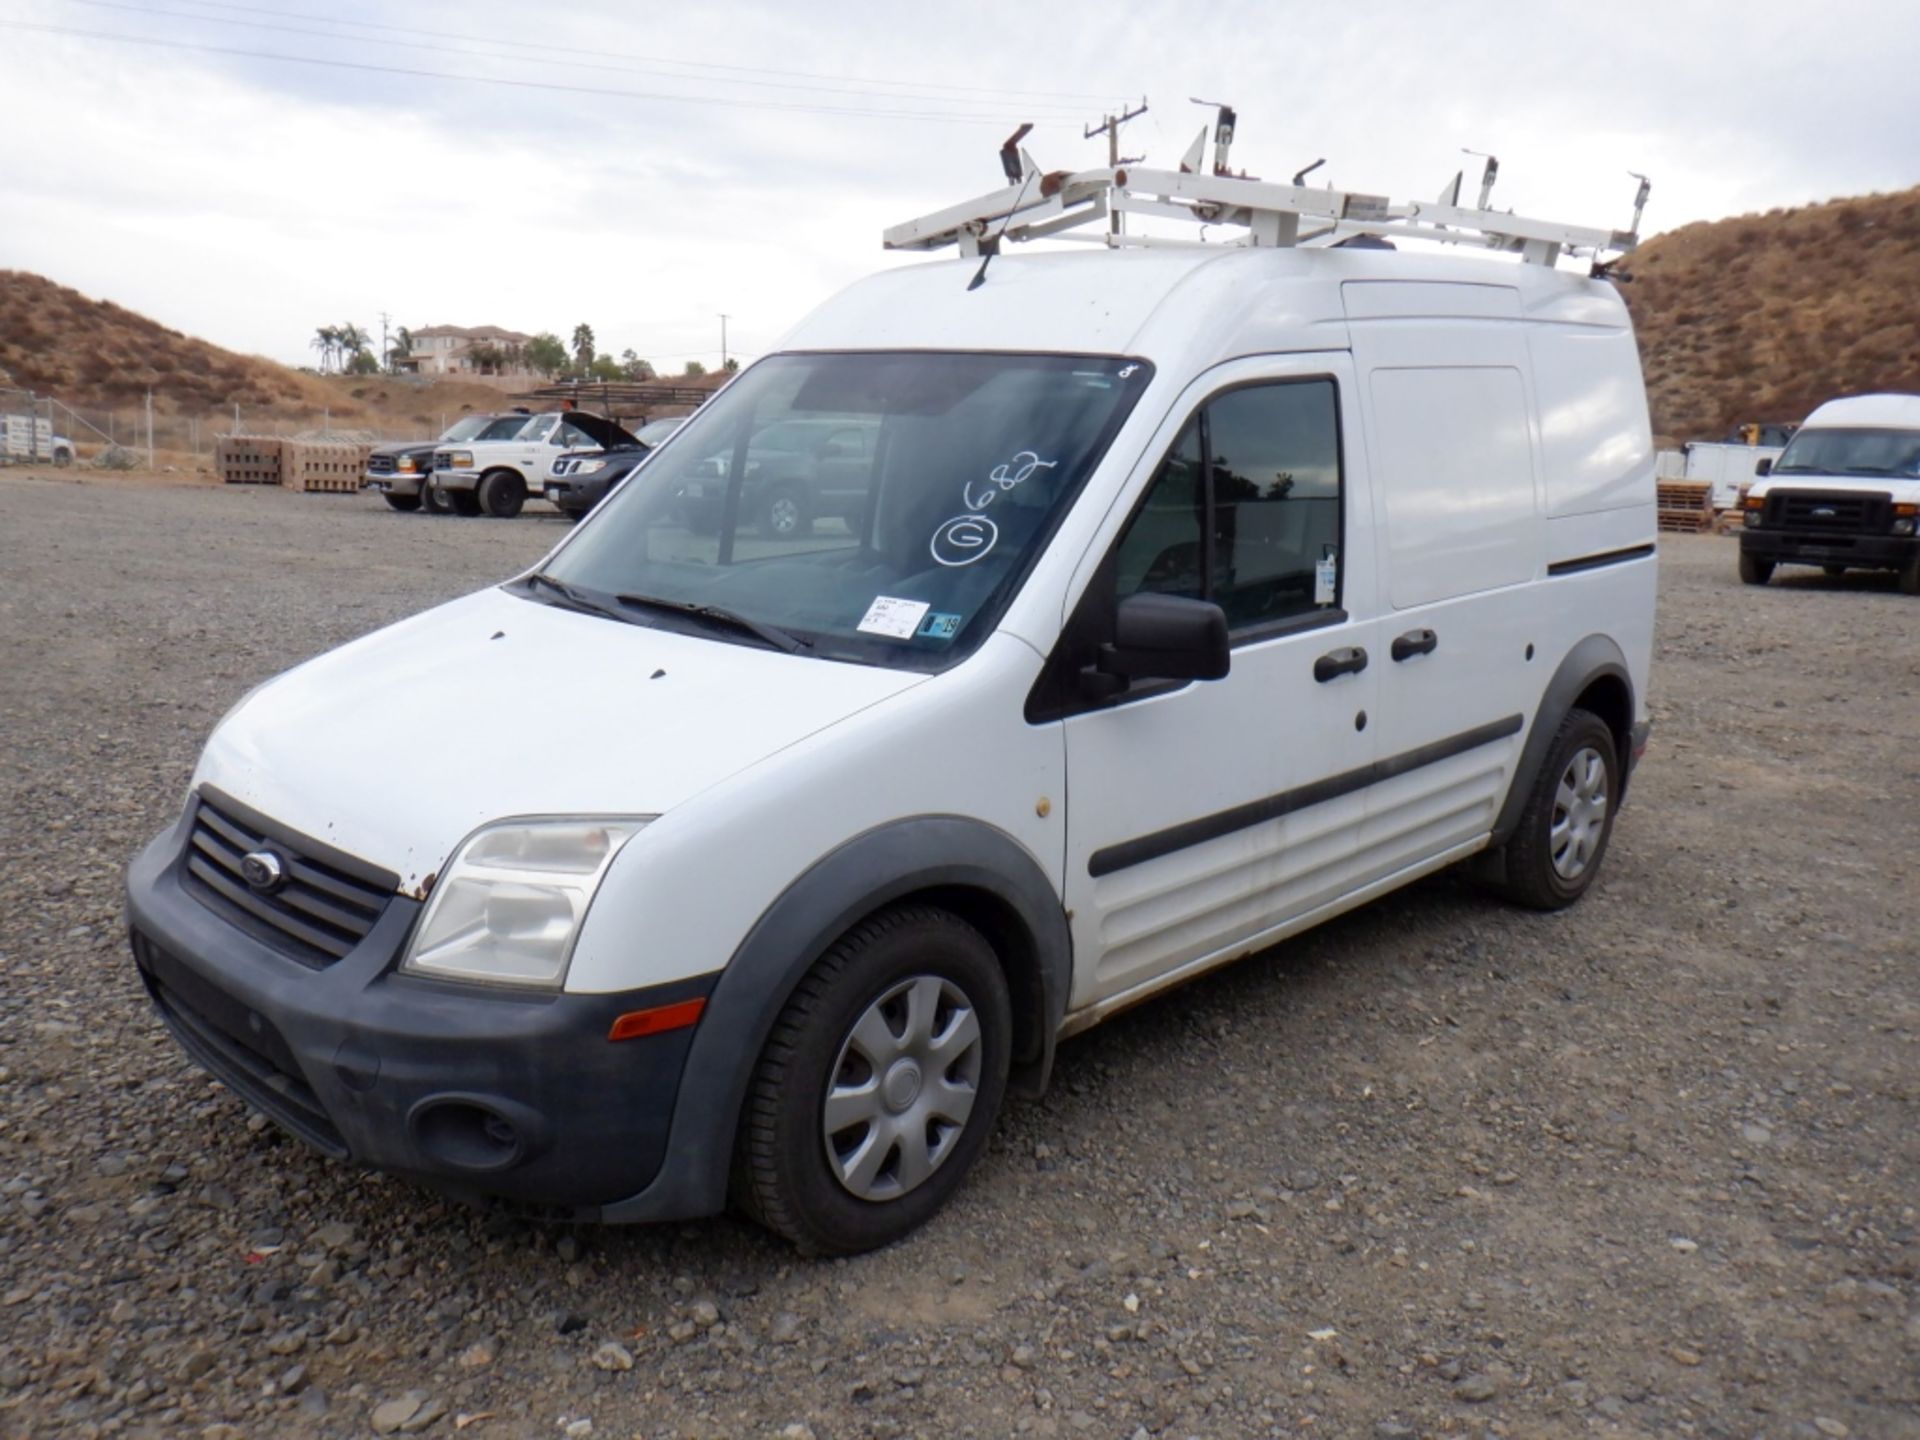 2013 Ford Transit Connect Cargo Van,